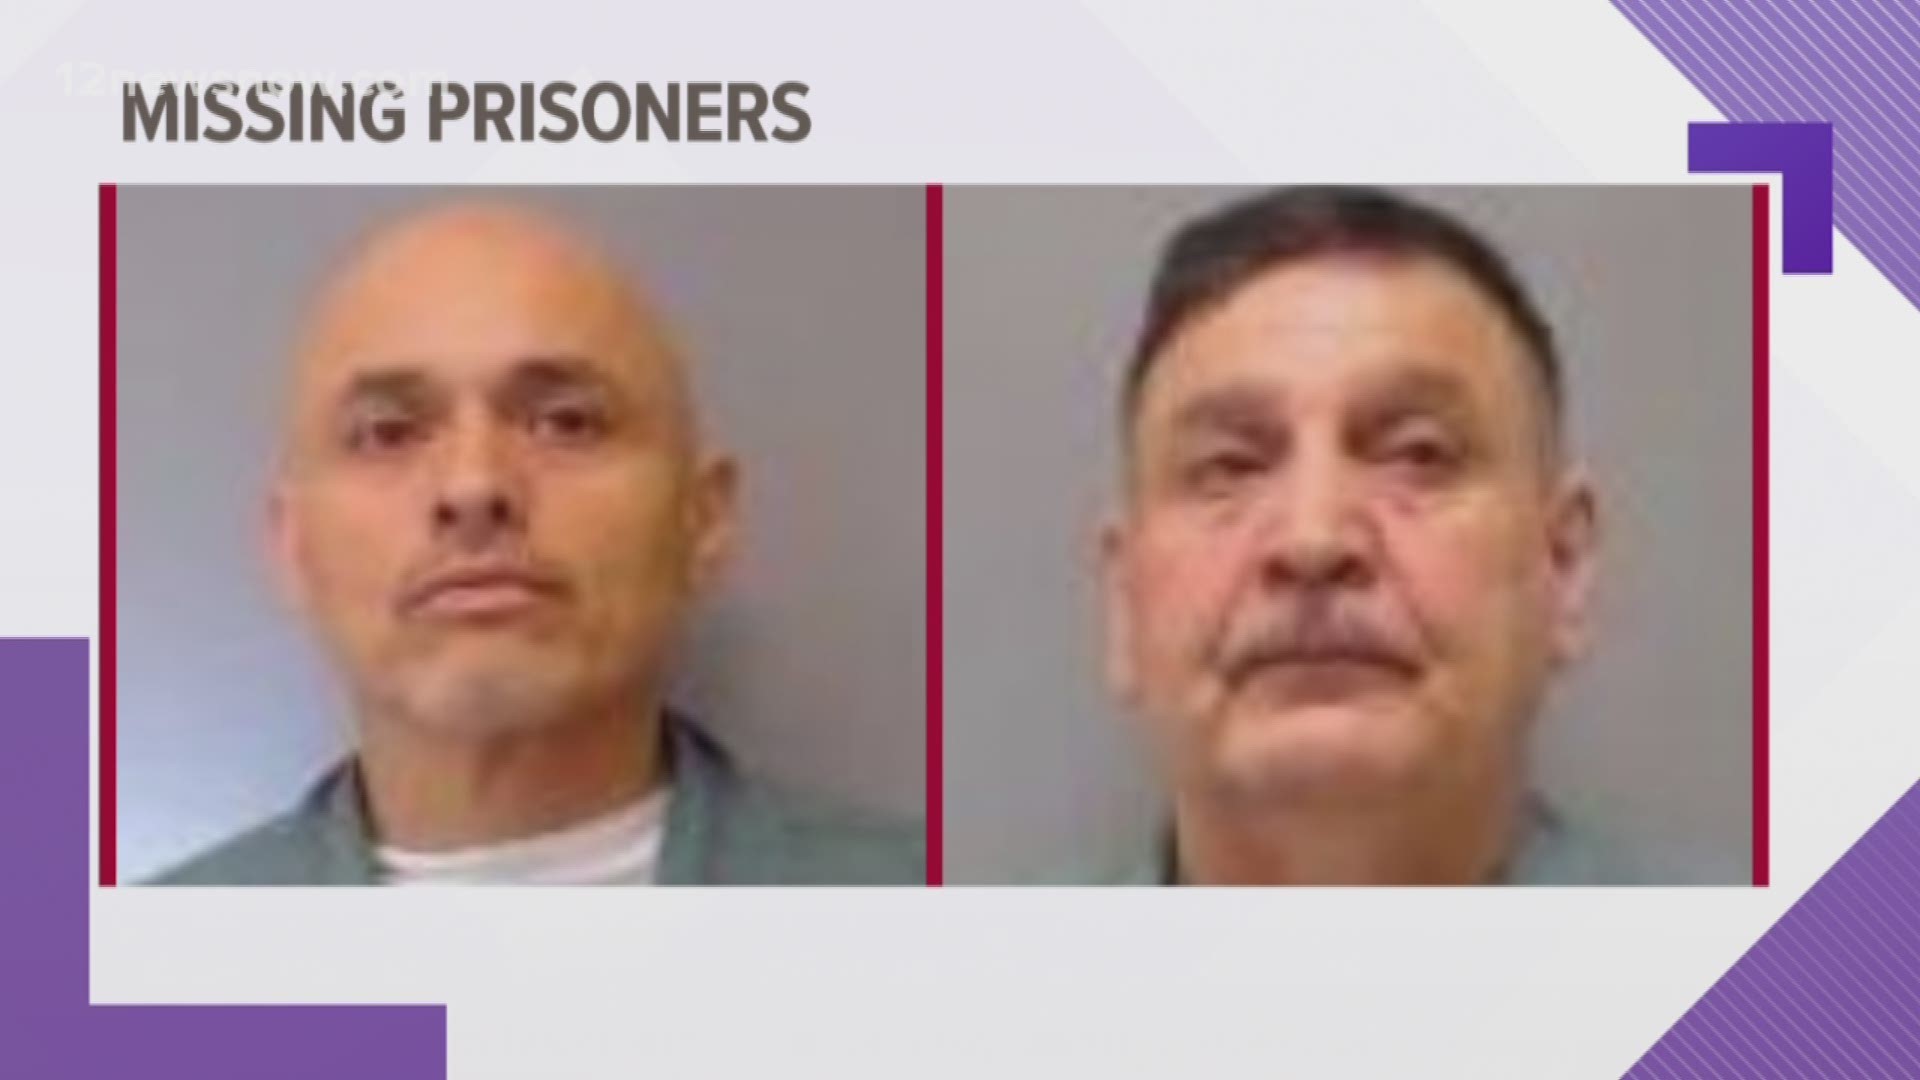 Salvador Garcia and Victor Luis Pescador were discovered missing on July 12, 2019, from the Satellite Prison Camp in Beaumont.